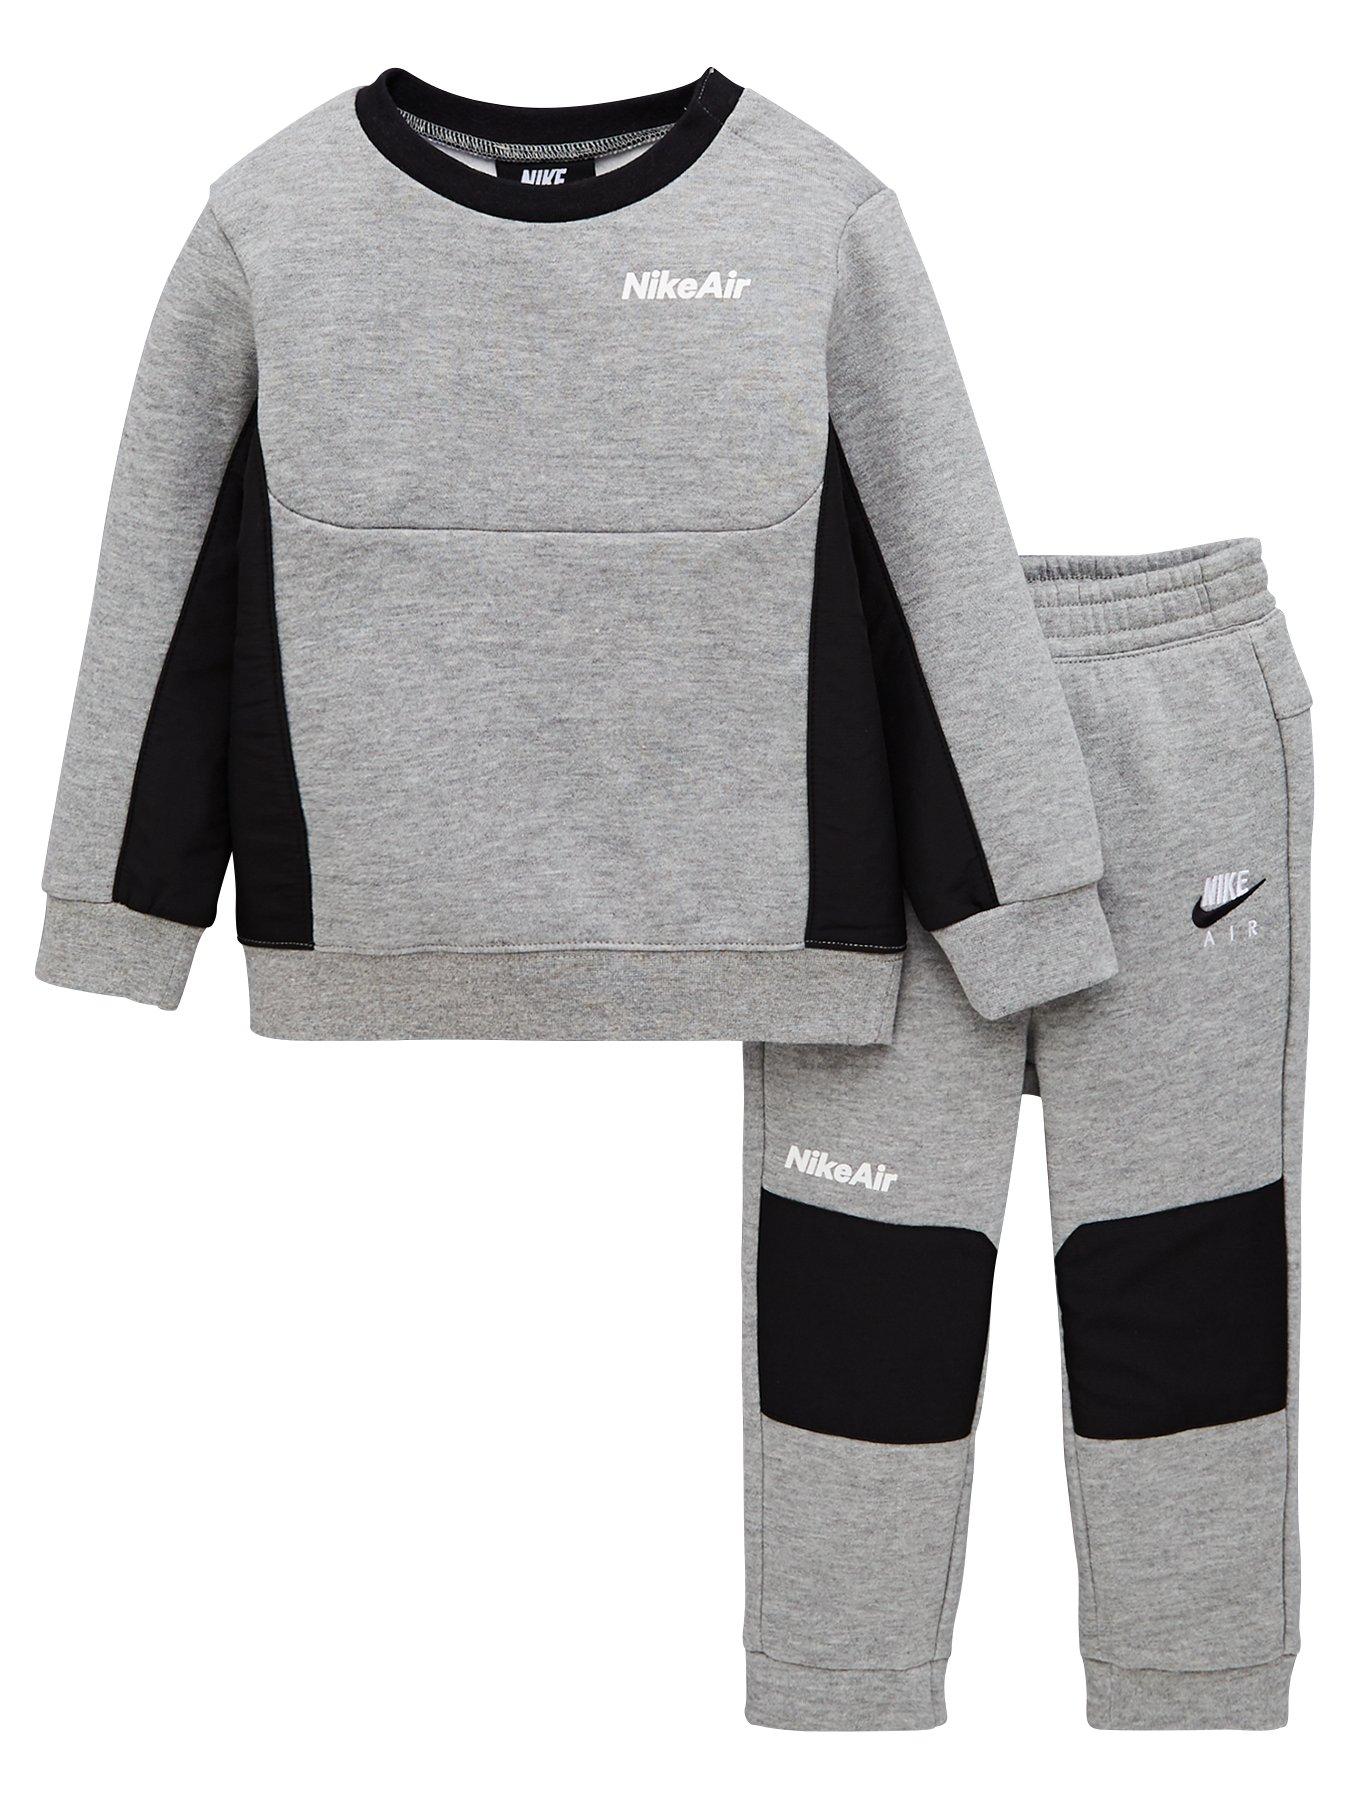 18 month boy nike clothes